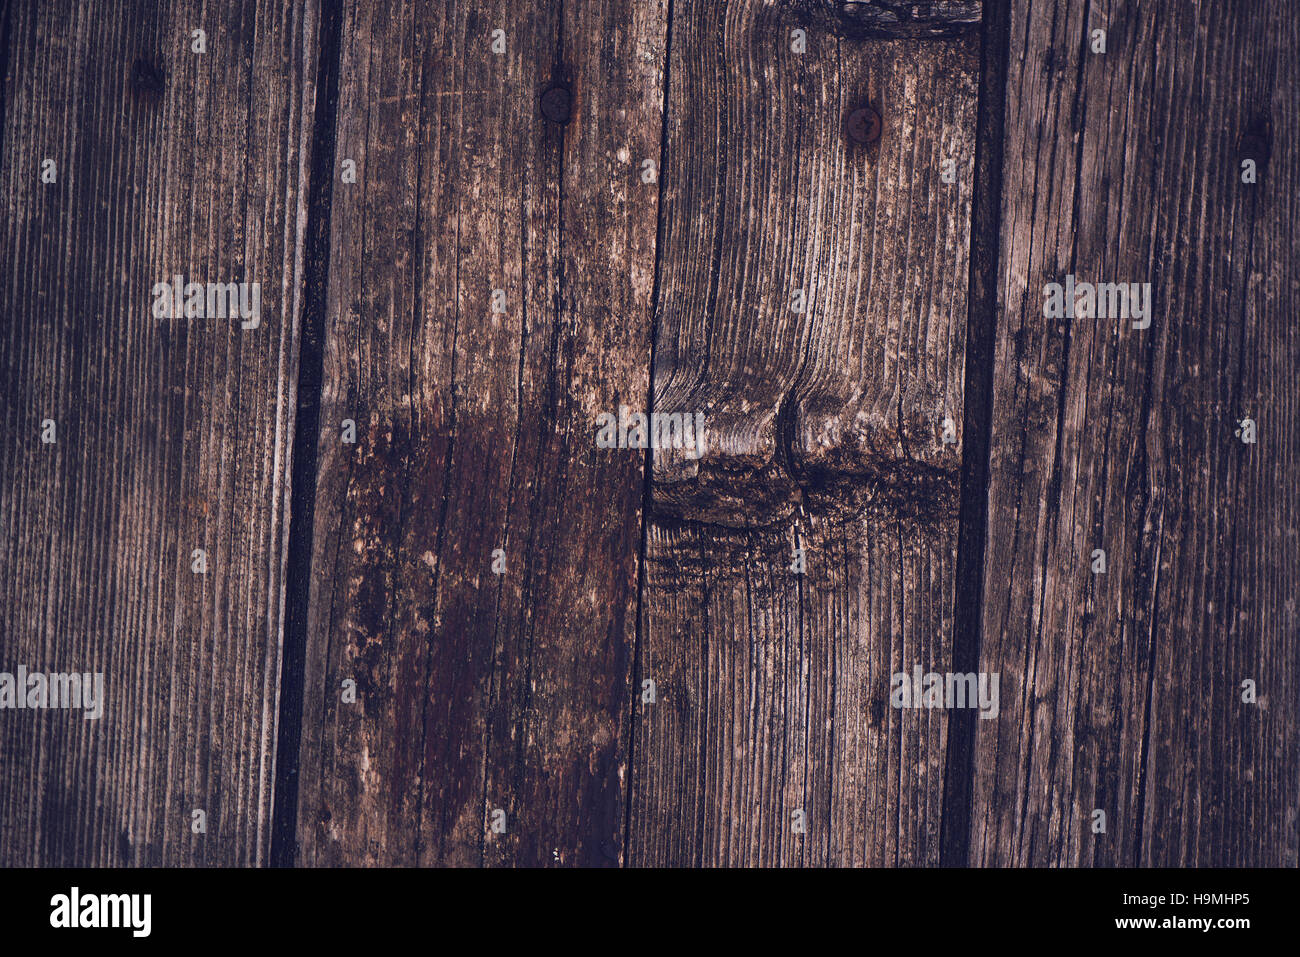 Rustic weathered wooden flooring surface texture Stock Photo